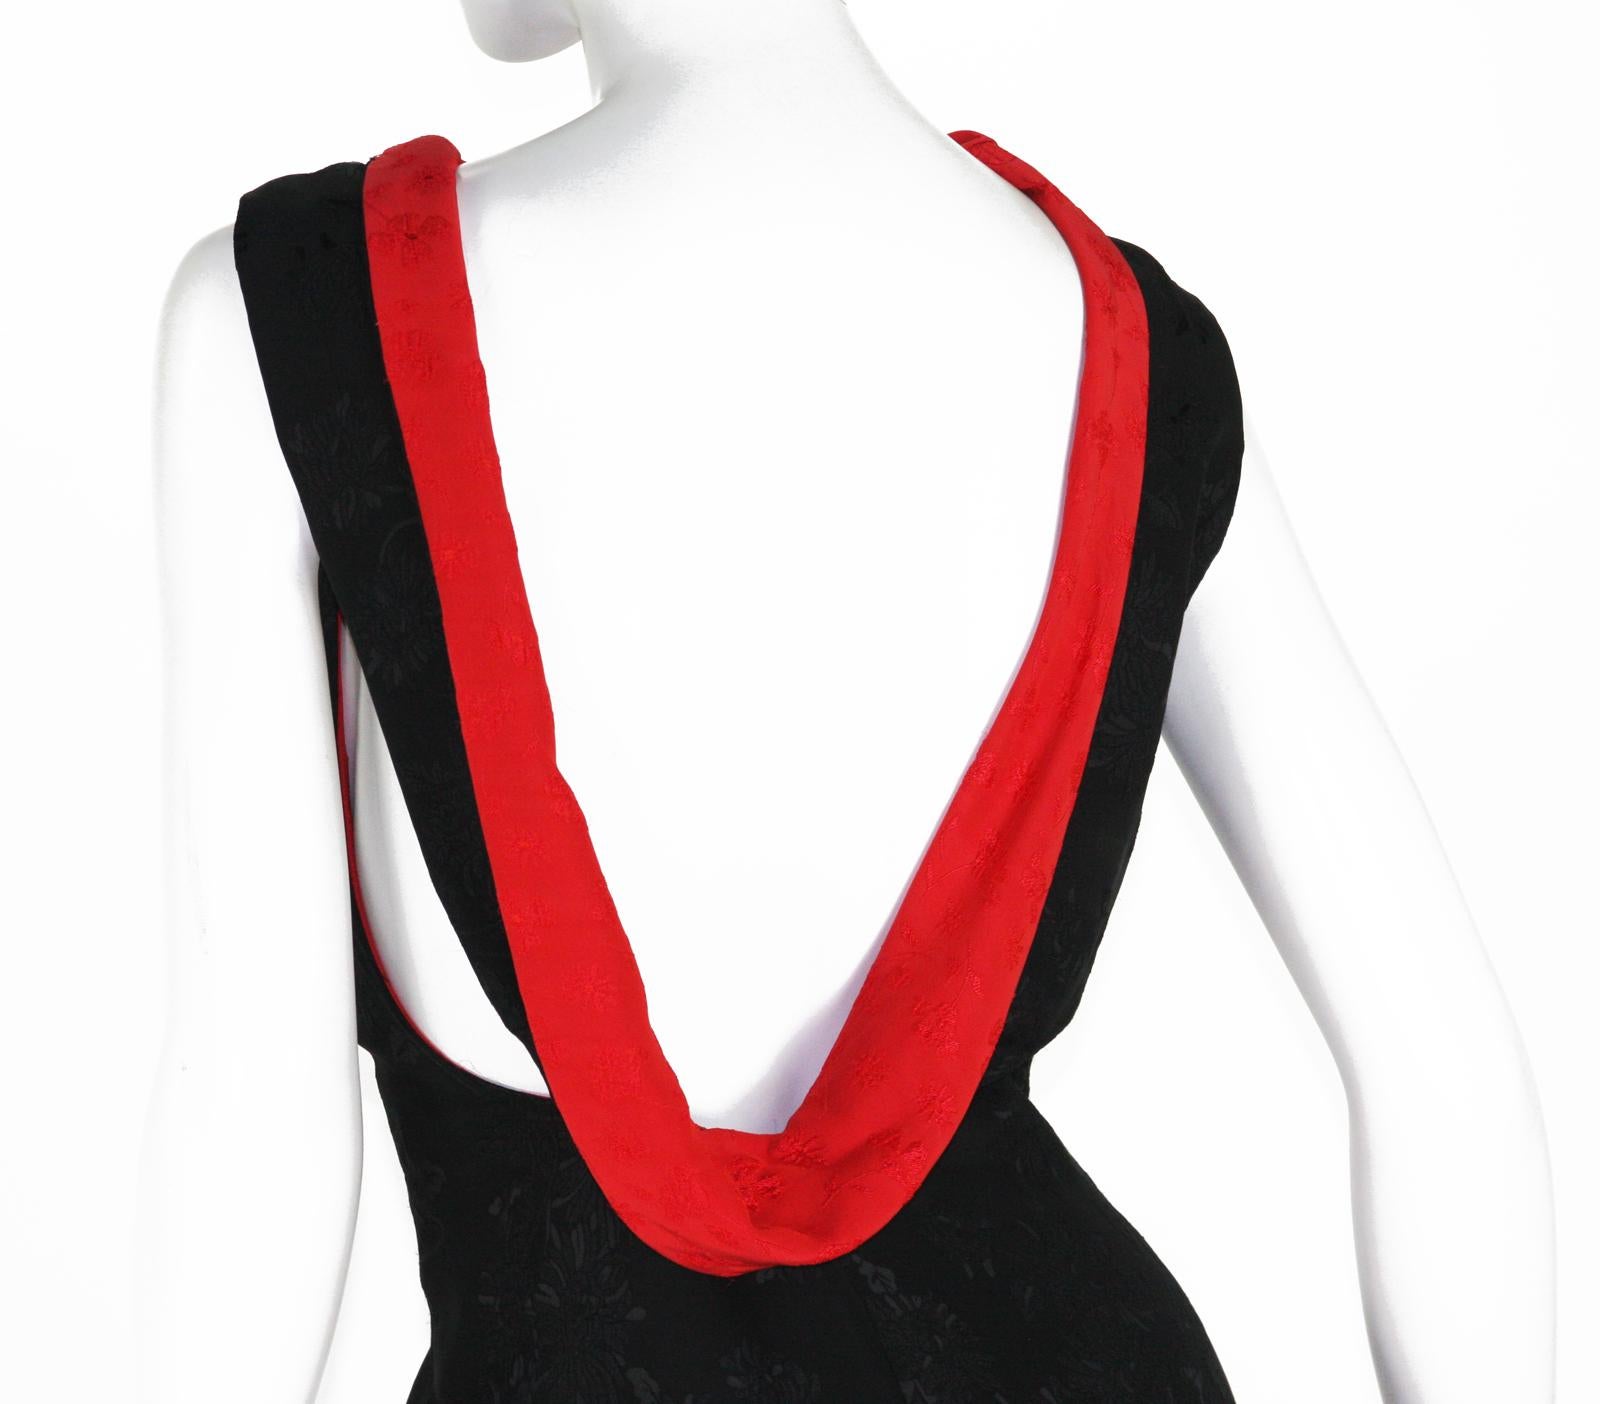 Gianni Versace Couture S/S 1998 Collection Black and Red Open Back Dress Gown  For Sale 4